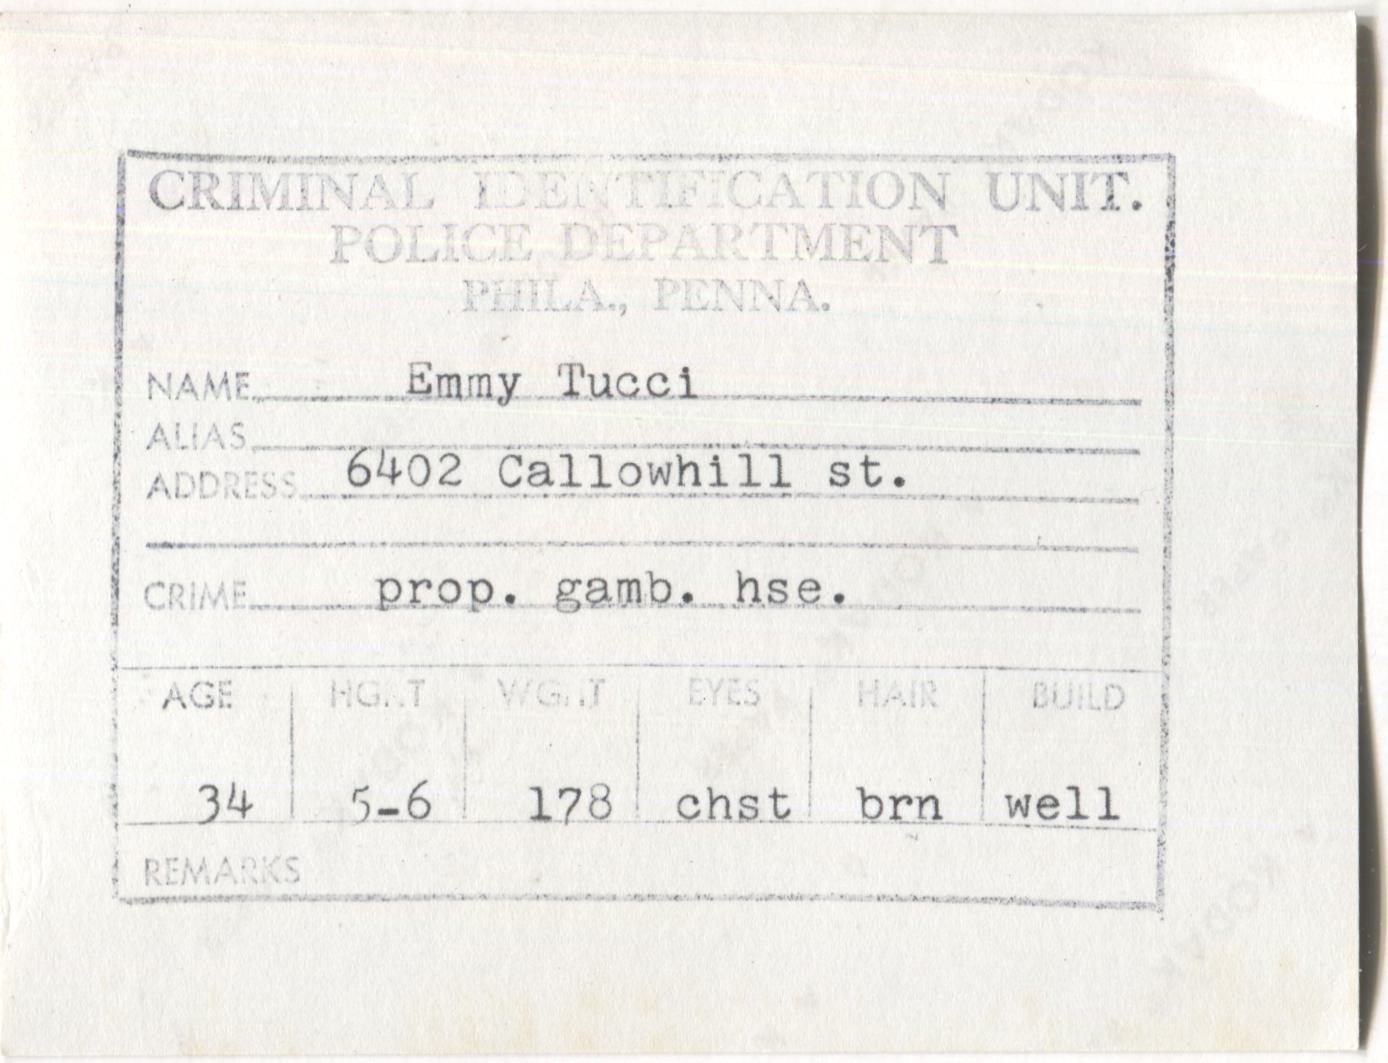 Emmy Tucci Mugshot - Arrested on 12/14/1963 for Being a Proprietor of a Gambling House